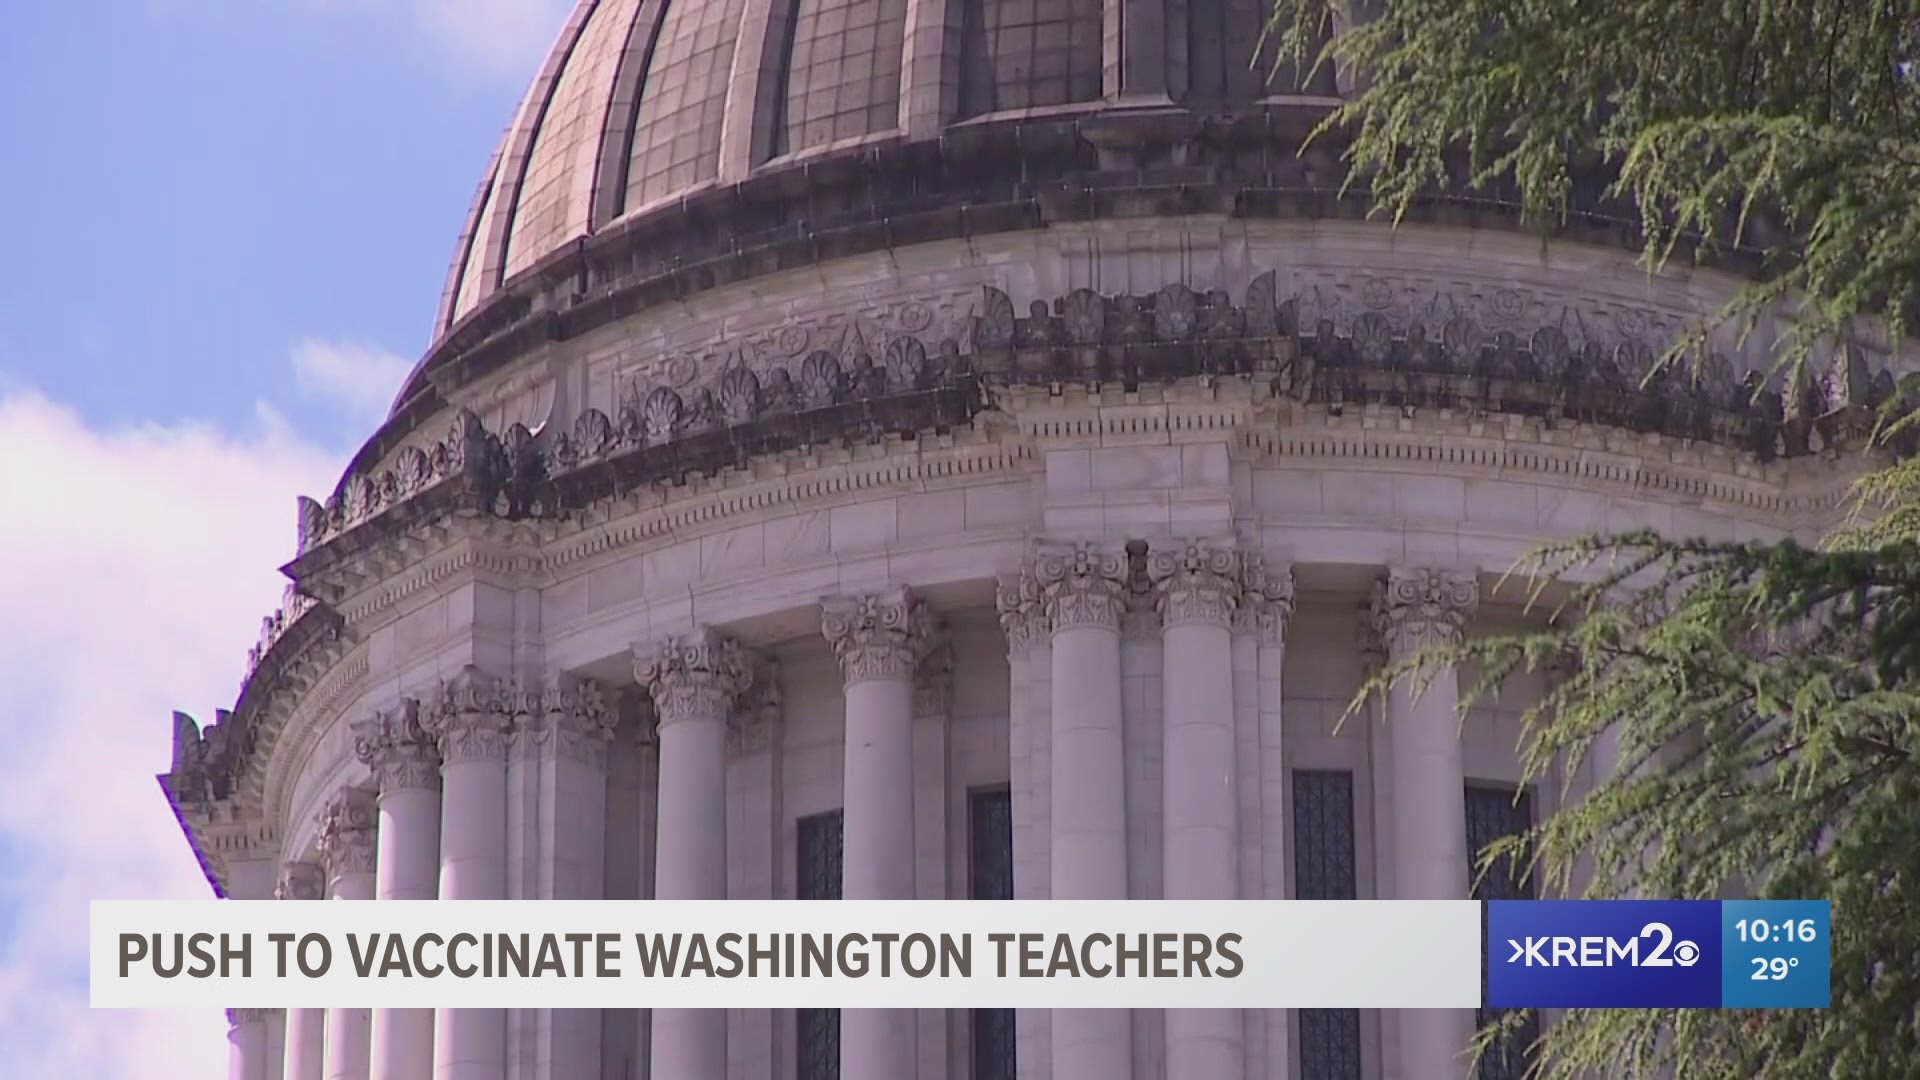 Most Washington teachers will currently have to wait weeks before becoming eligible.